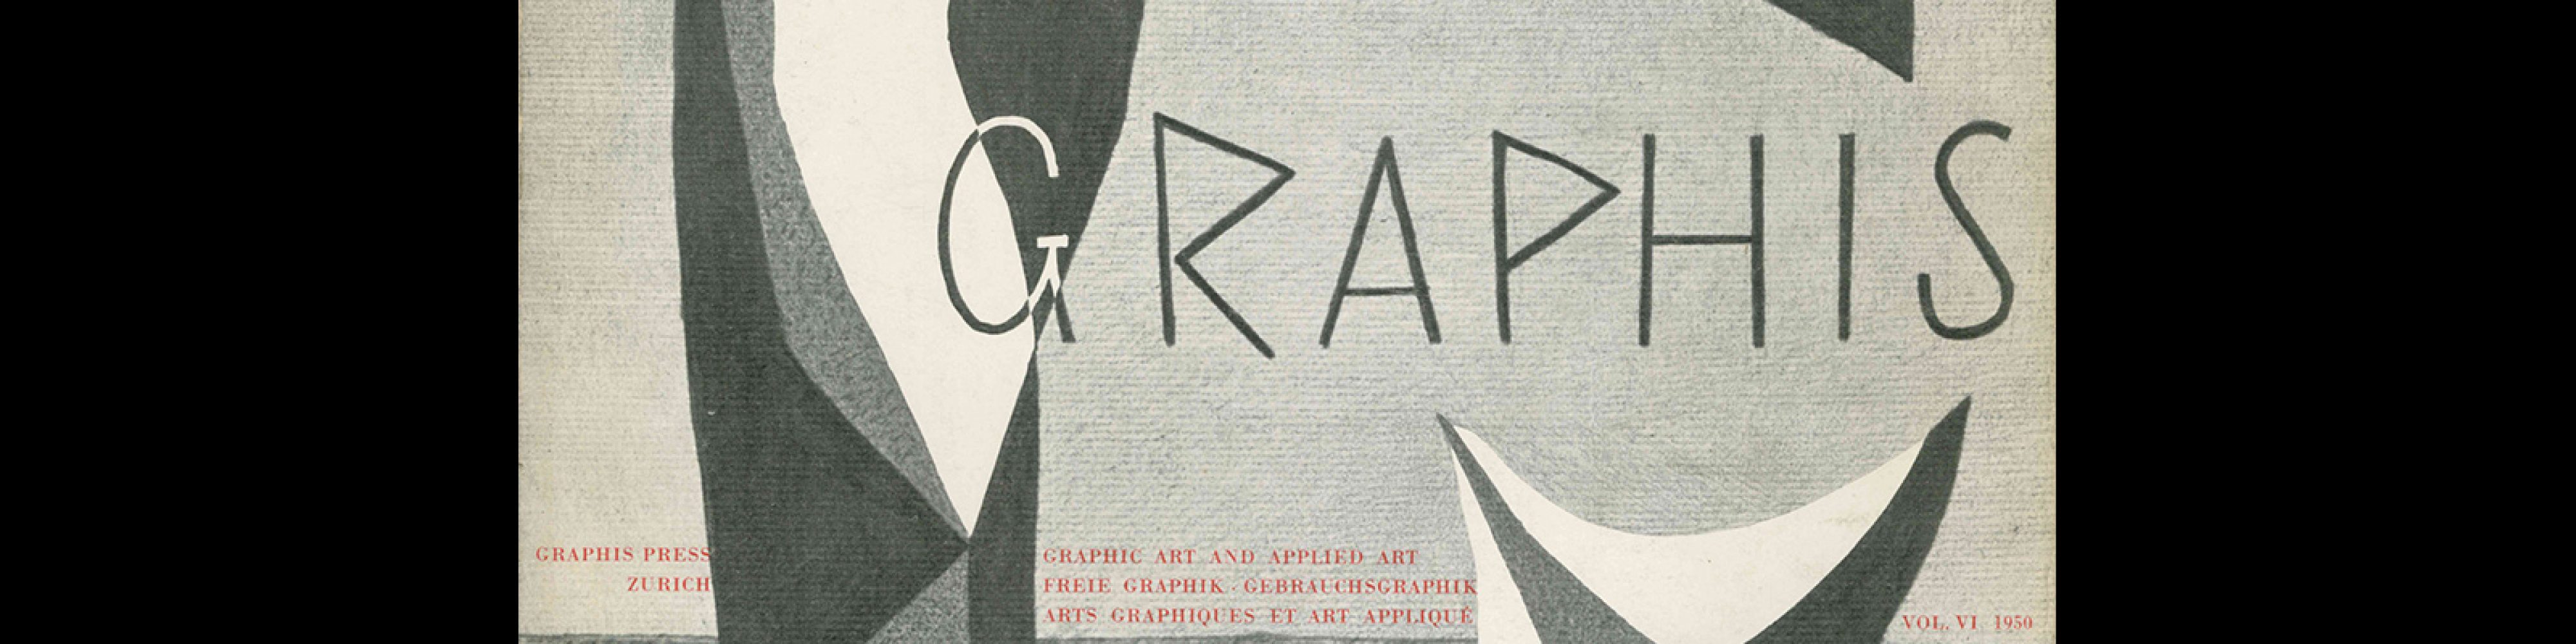 Graphis 30, 1950. Cover design by Jan Bons